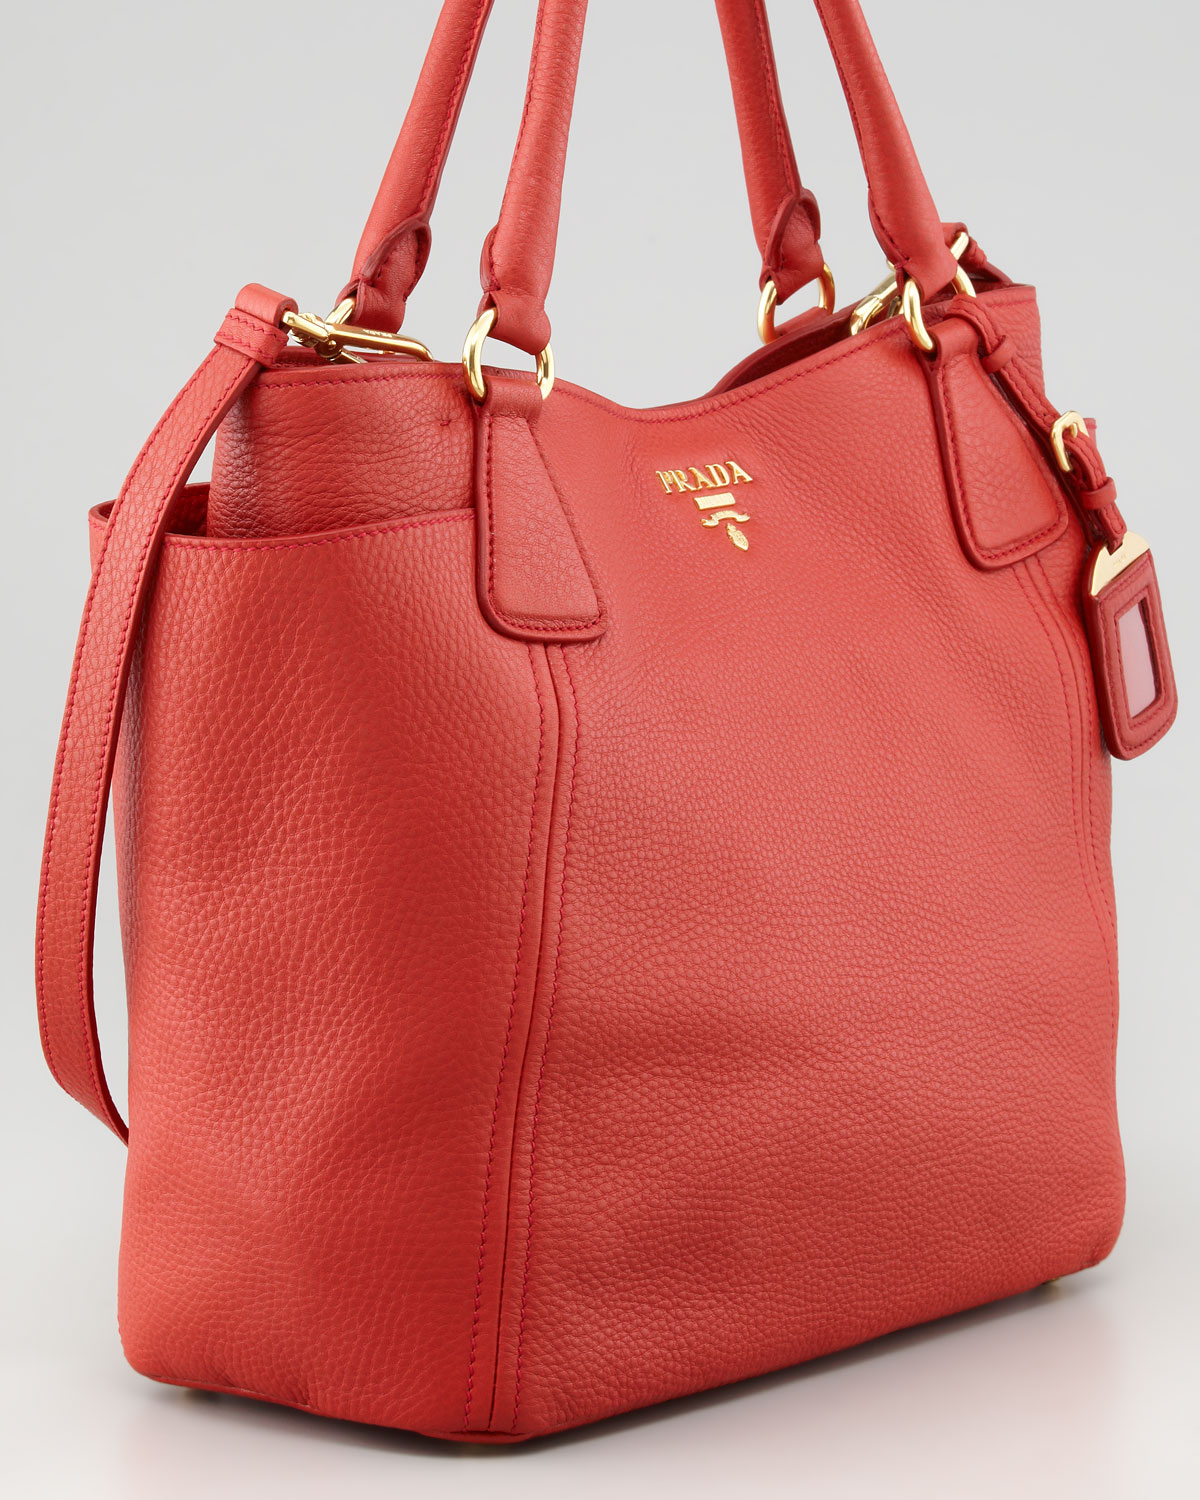 Prada Daino Doublepocket Tote Bag Rosso in Red (rosso) | Lyst  